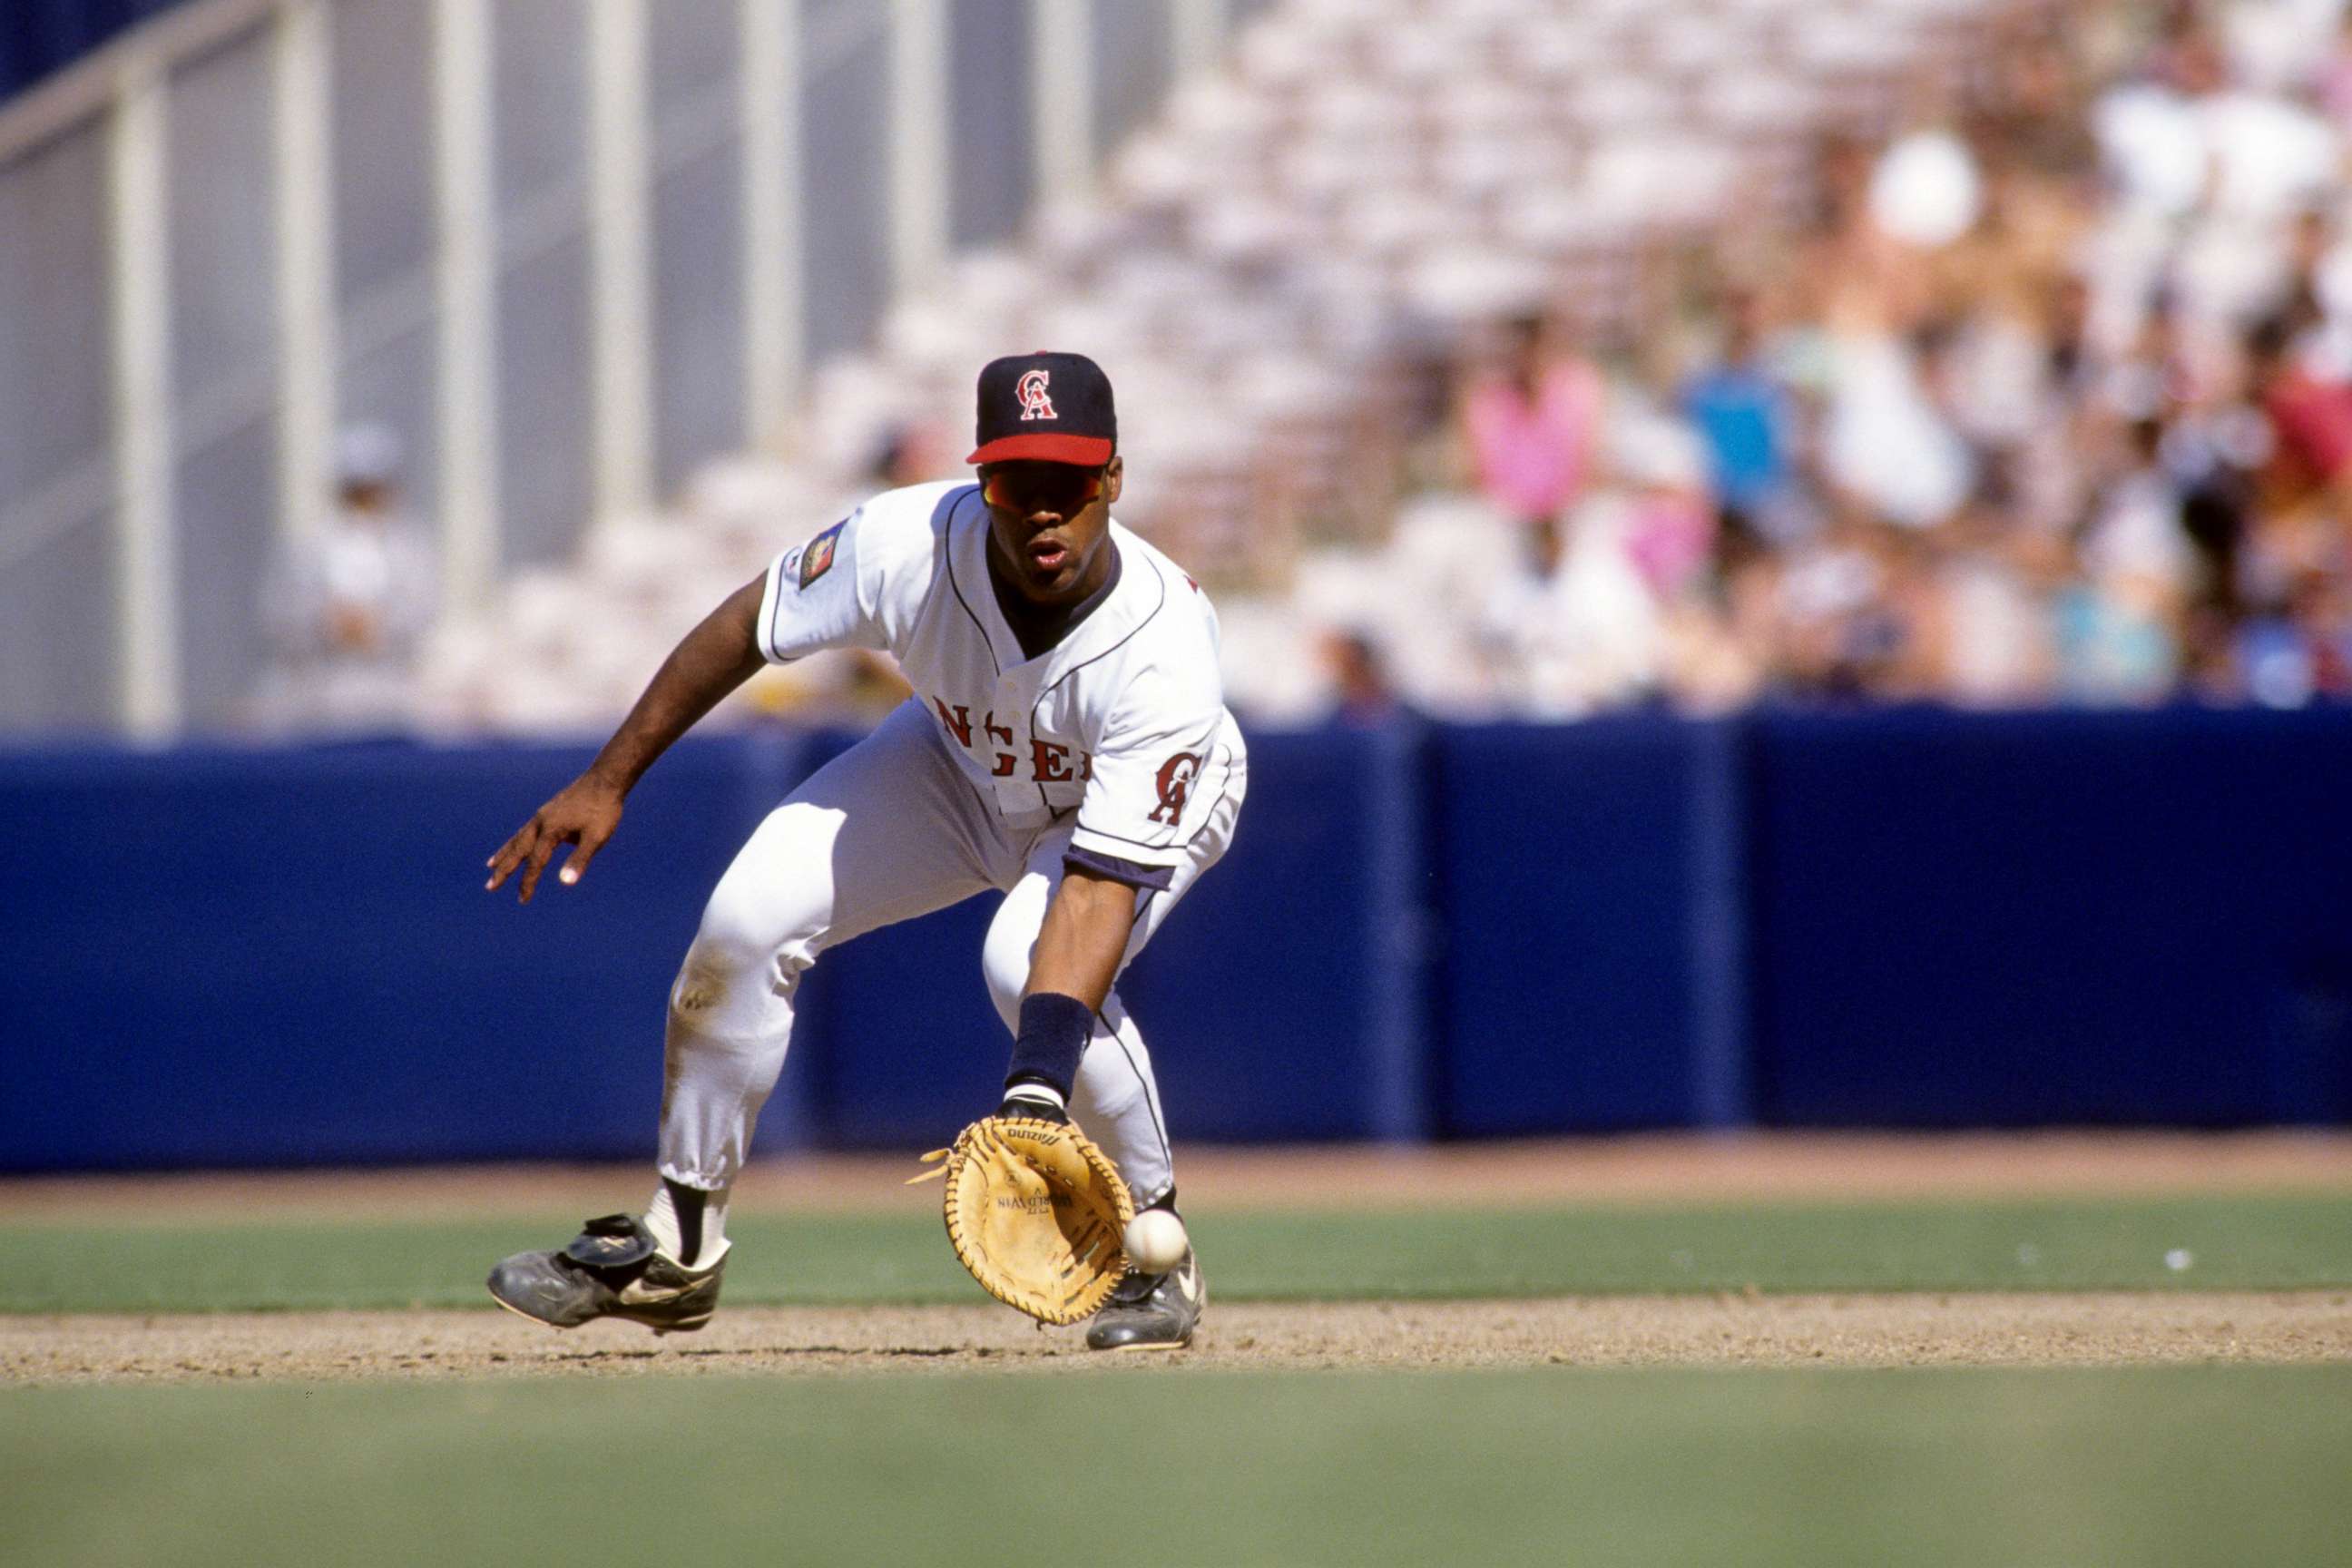 PHOTO: Eduardo Perez of the California Angels fields during the game against the Cleveland Indians at Anaheim Stadium, April 11, 1994, in Anaheim, Calif.